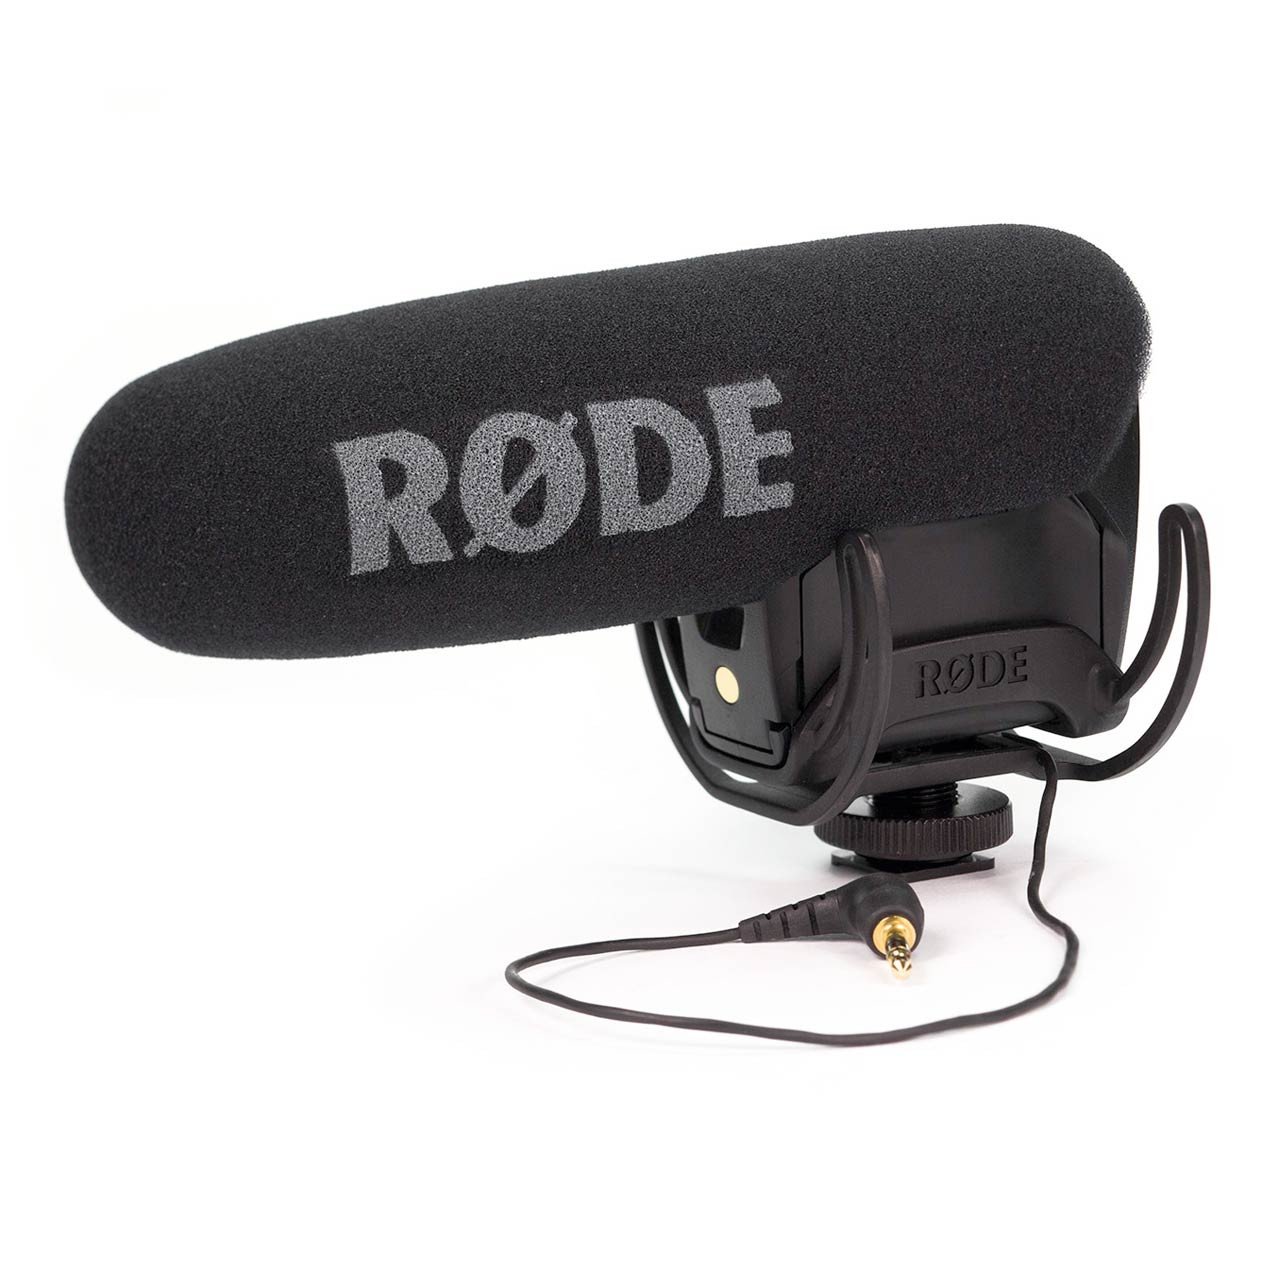 Video Microphones - RODE VideoMic Pro Compact Directional On-camera Microphone